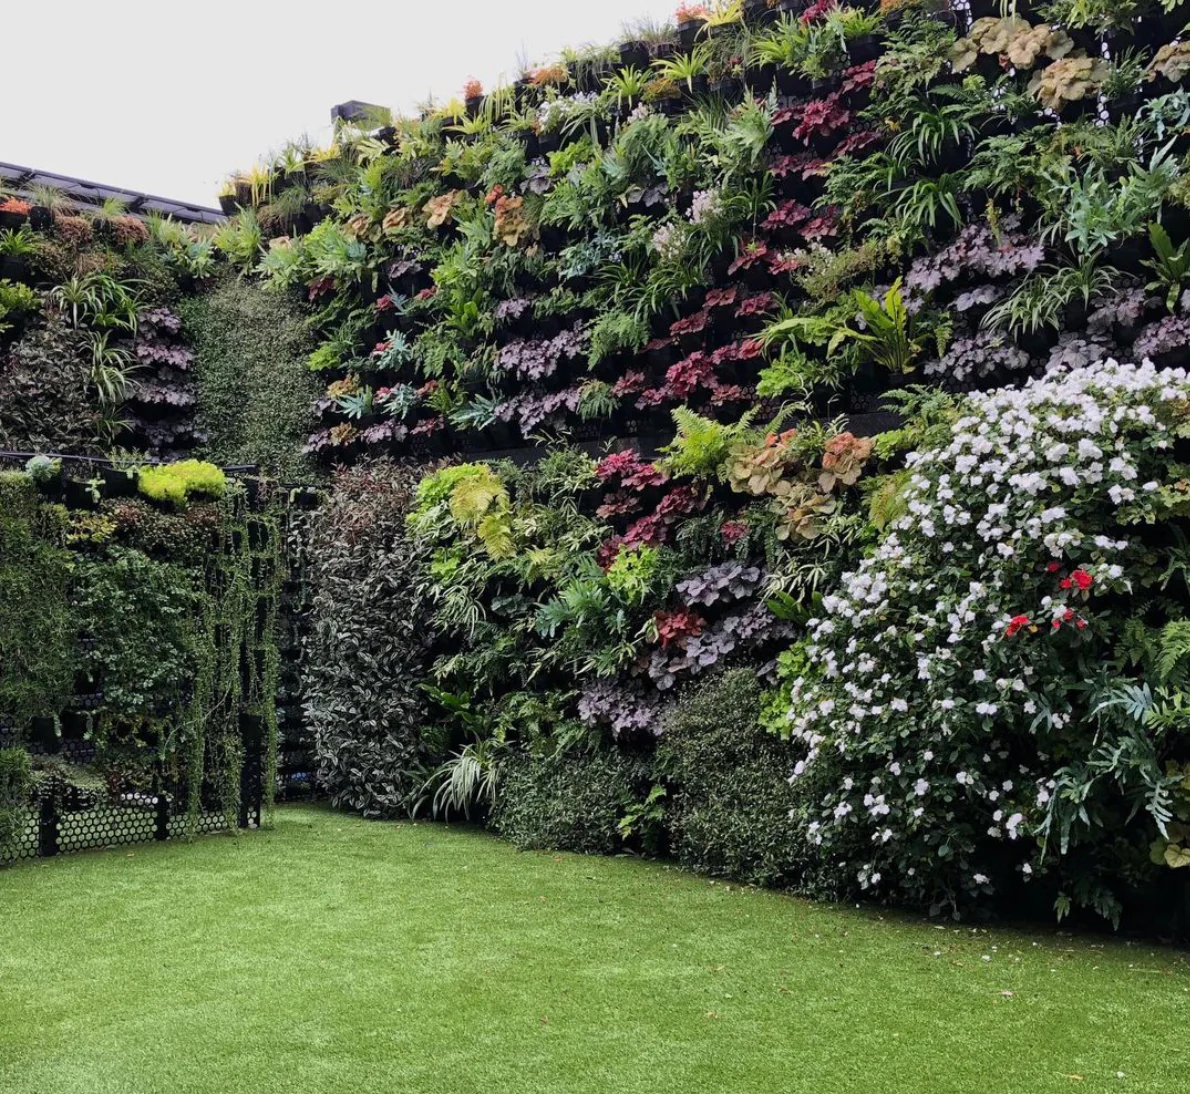 Something Really Special About The Vertical Gardens